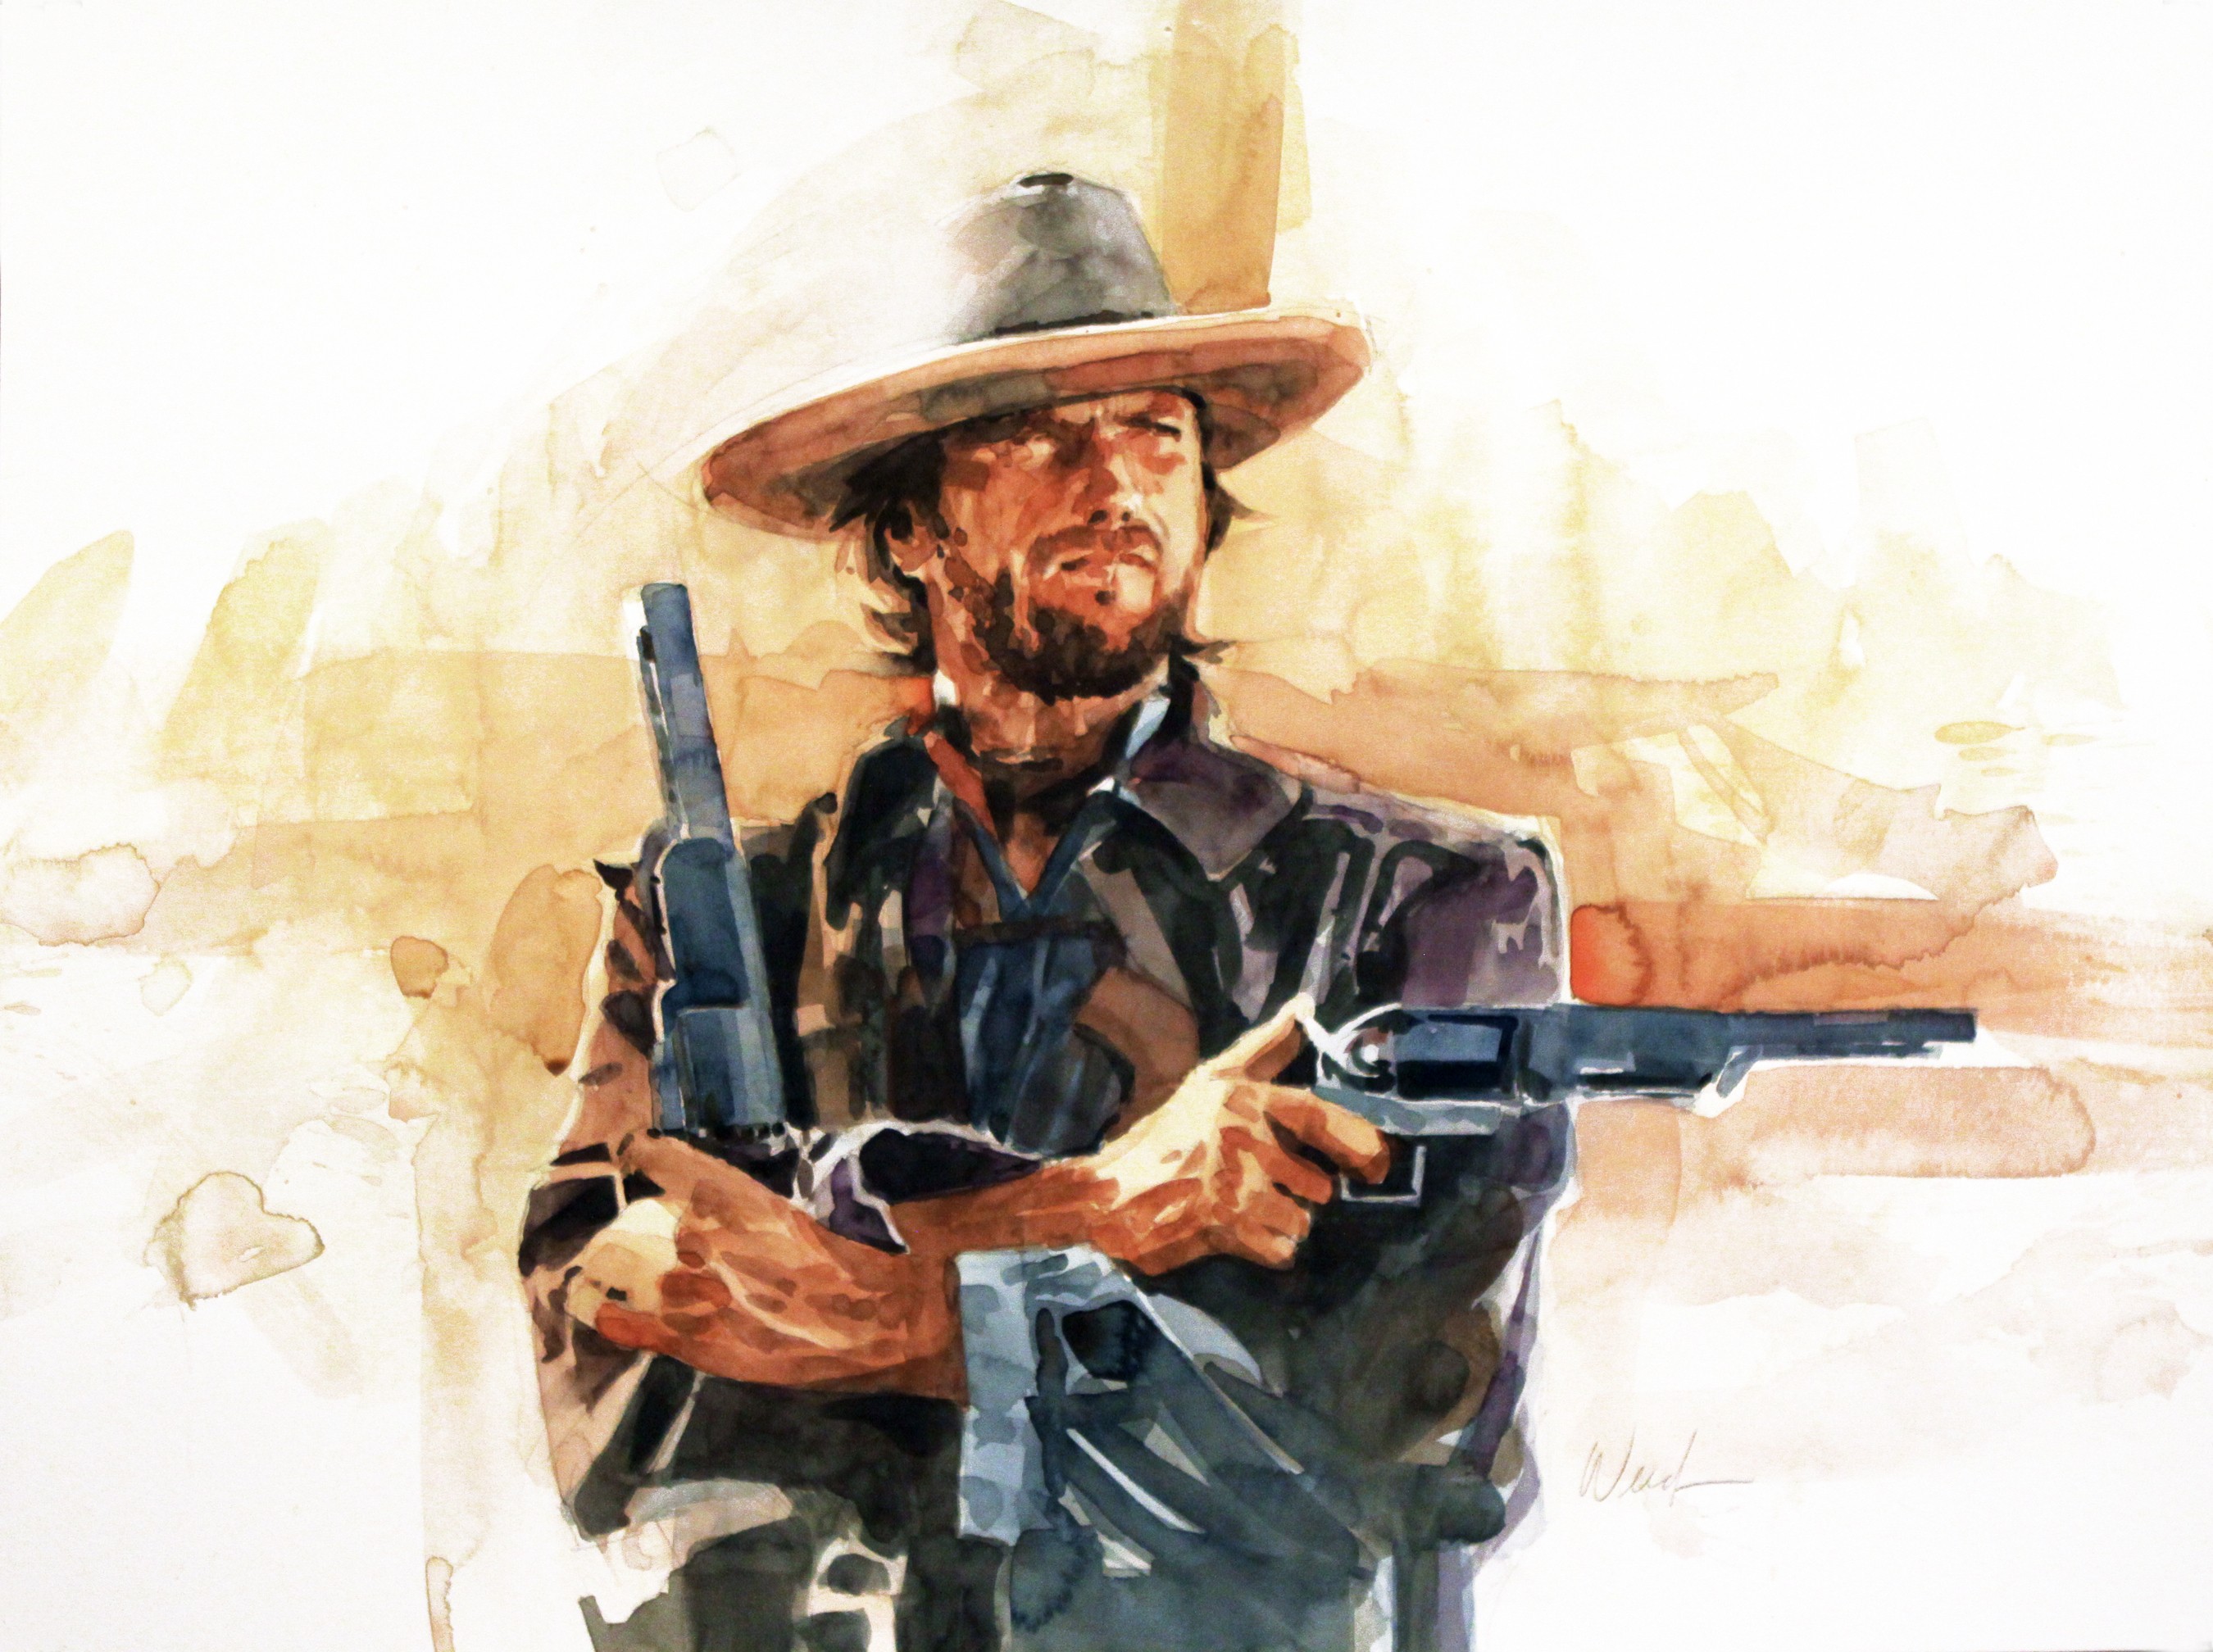 People 2700x2016 Clint Eastwood artwork movies western revolver weapon men The Outlaw Josey Wales